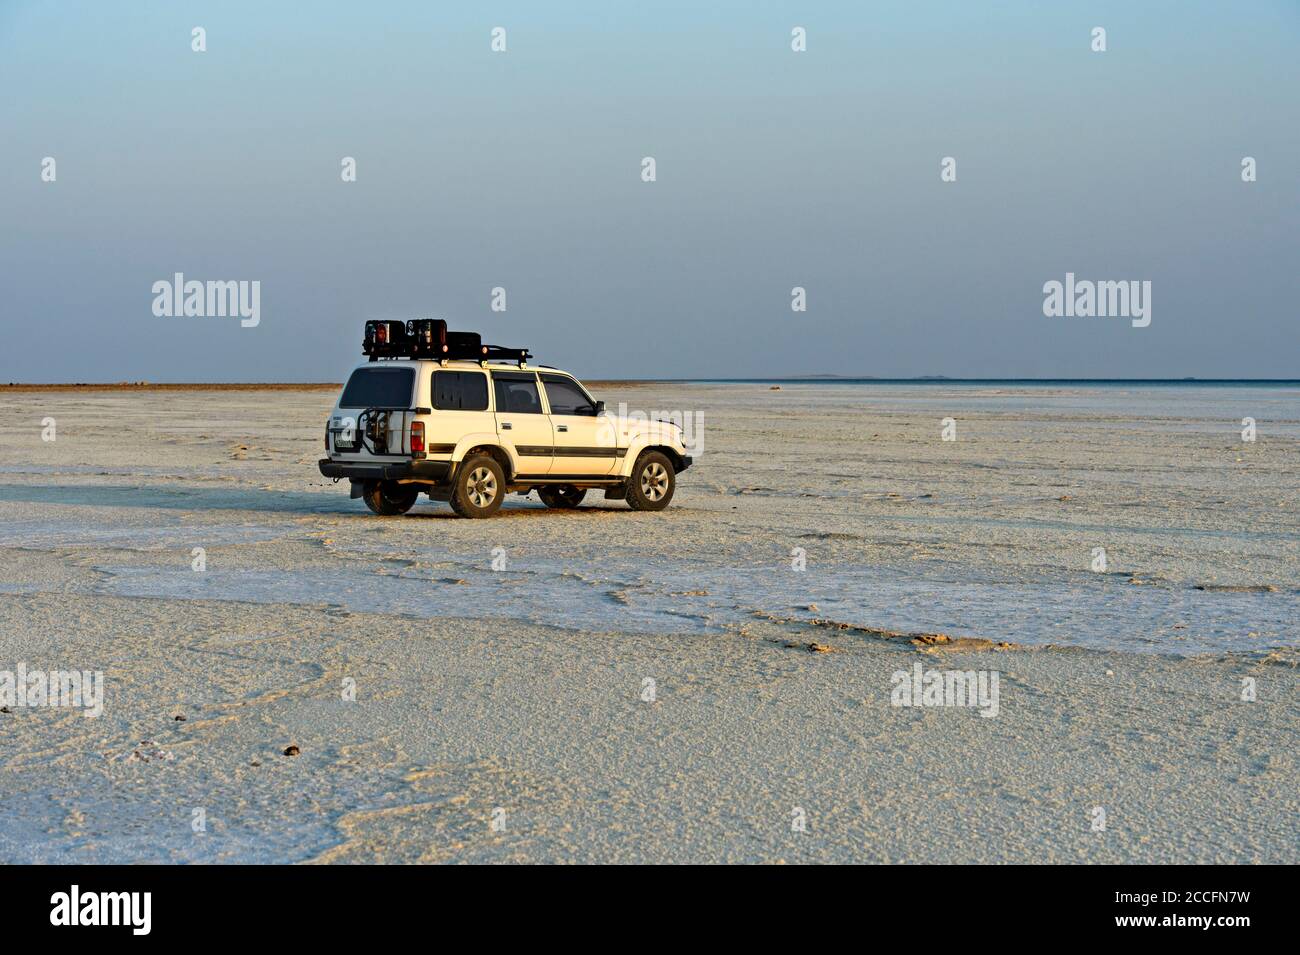 4x4 vehicle of a local tourism company stands on the salt crust of the Assale Salt Lake, Hamedala, Danakil Valley, Afar Region, Ethiopia Stock Photo